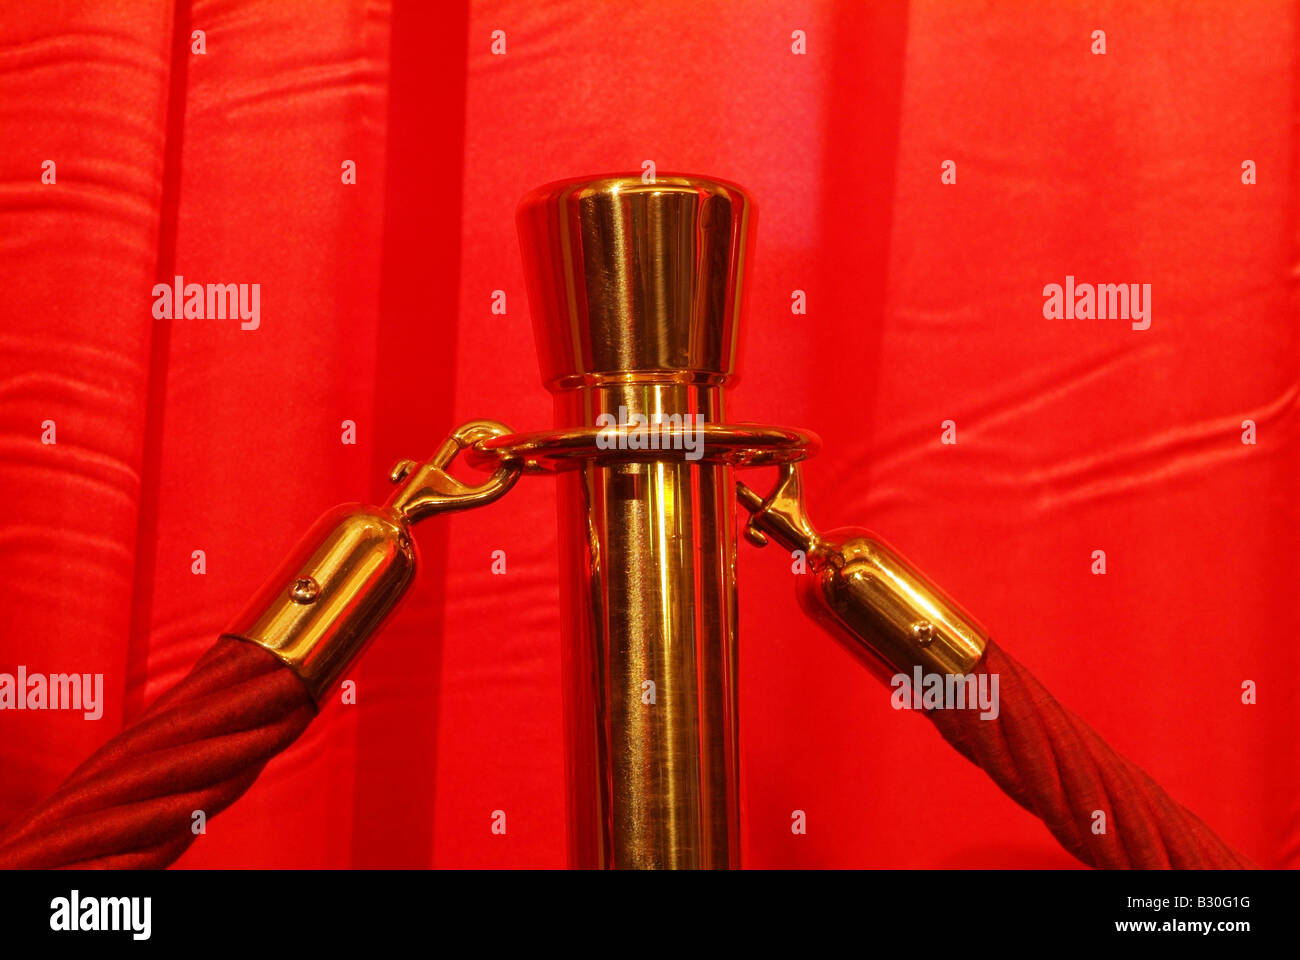 Red cords on a gilded pole Stock Photo